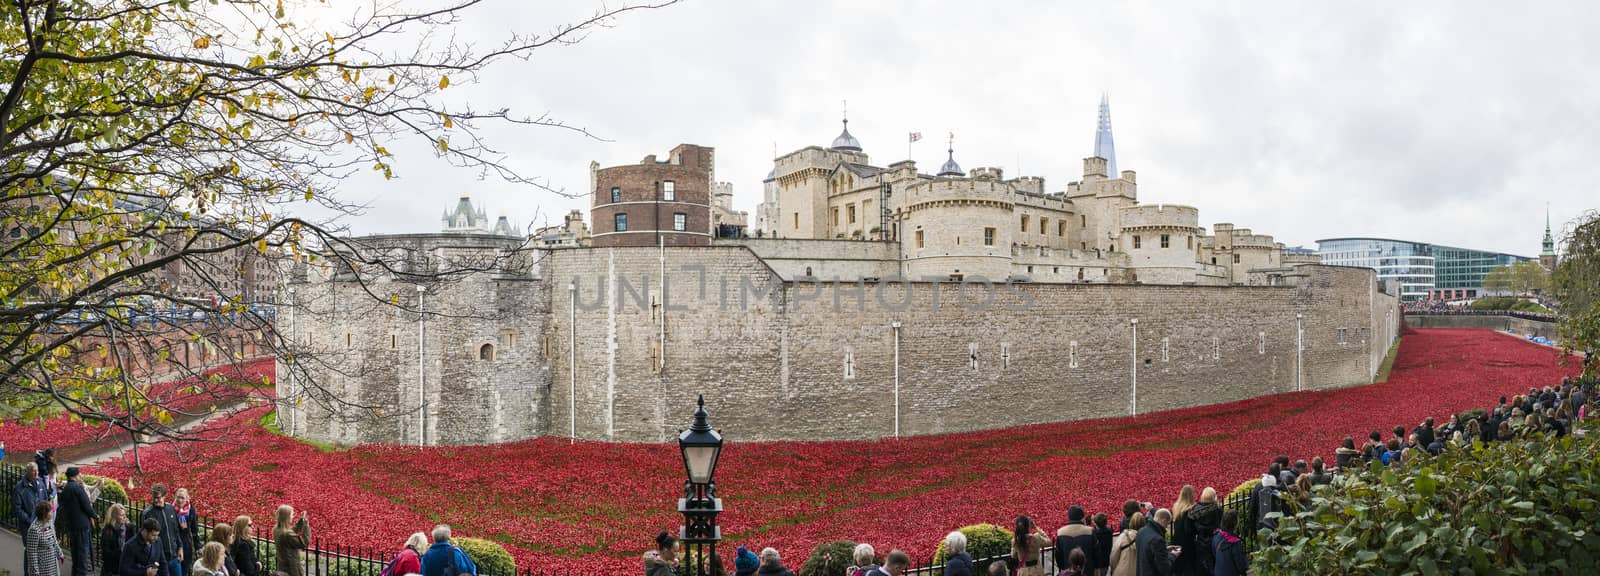 LONDON, UK - NOVEMBER 08: Panoramic of art installation by Paul Cummins at Tower of London. November 08, 2014 in London. The ceramic poppies were planted to mark the centenary of WWI's outbreak.